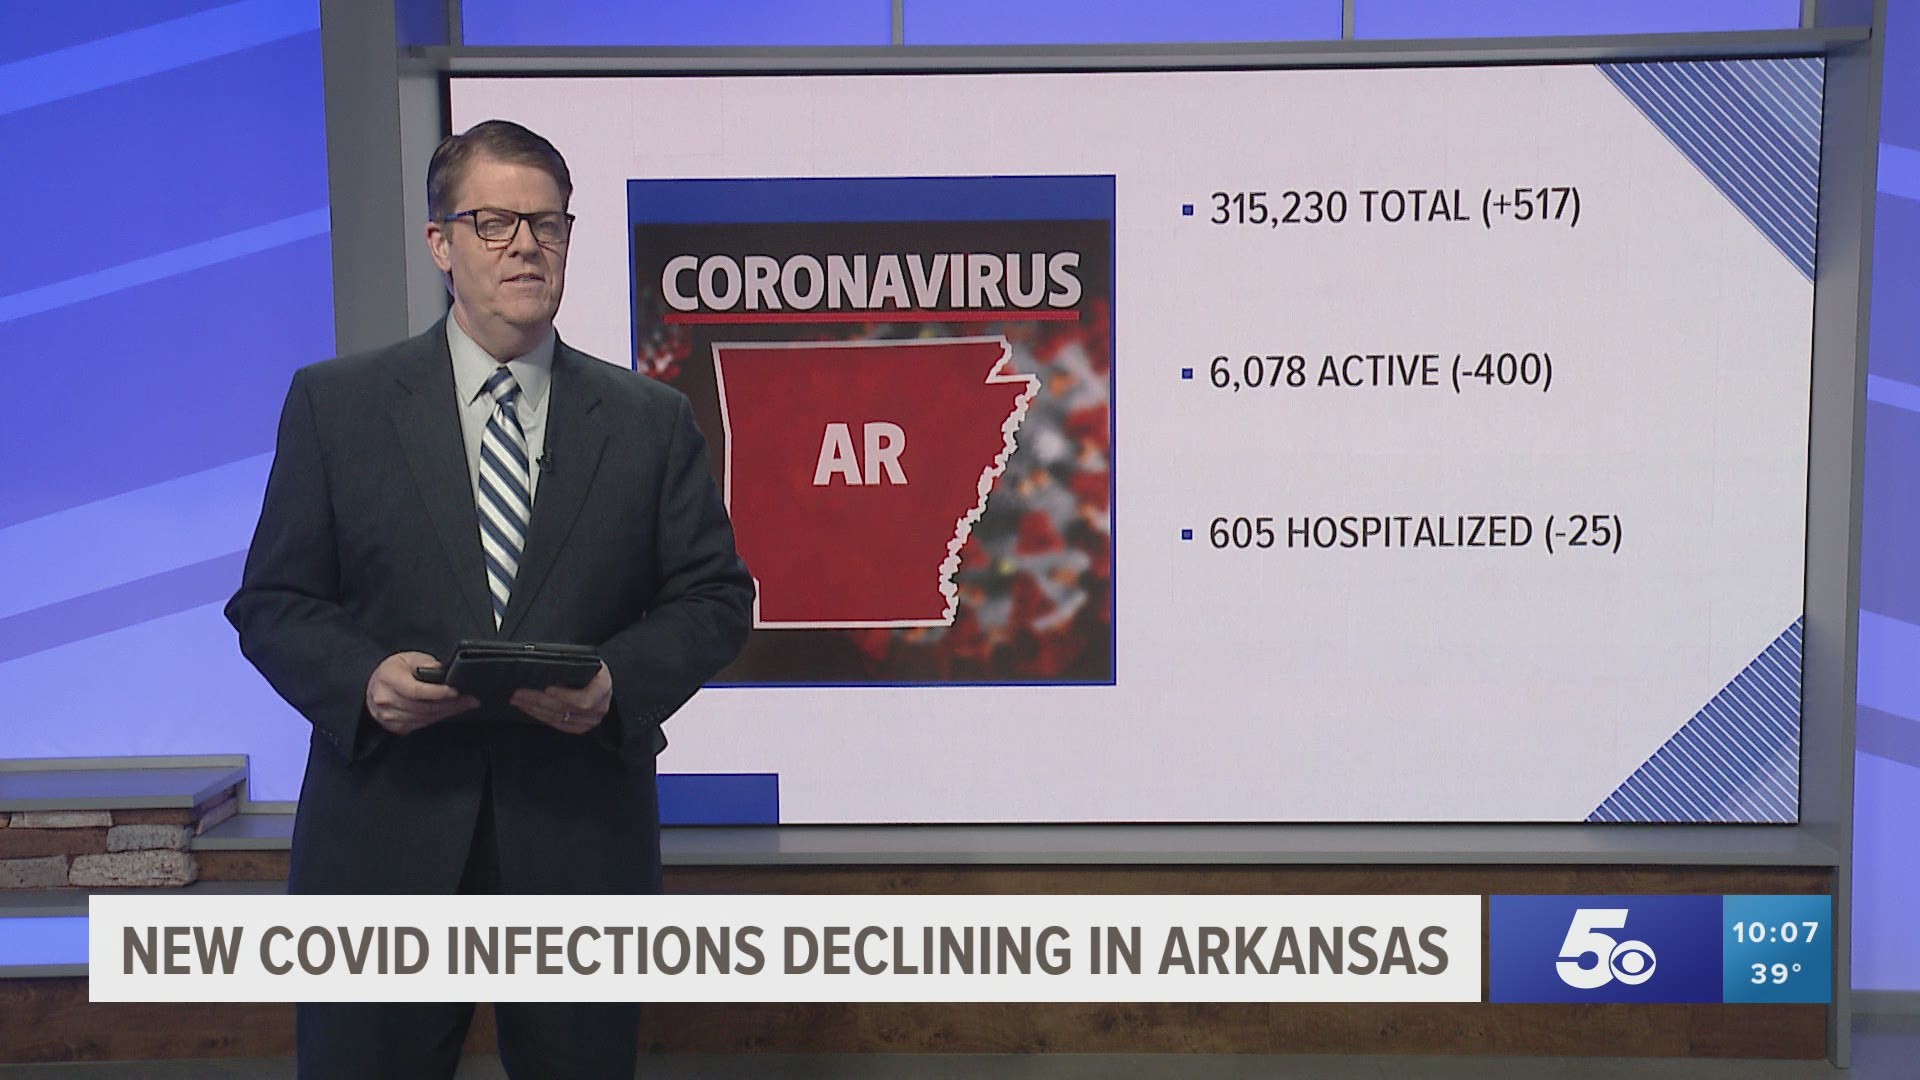 The Arkansas Department of Health (ADH) reported 517 new COVID-19 cases on Saturday.